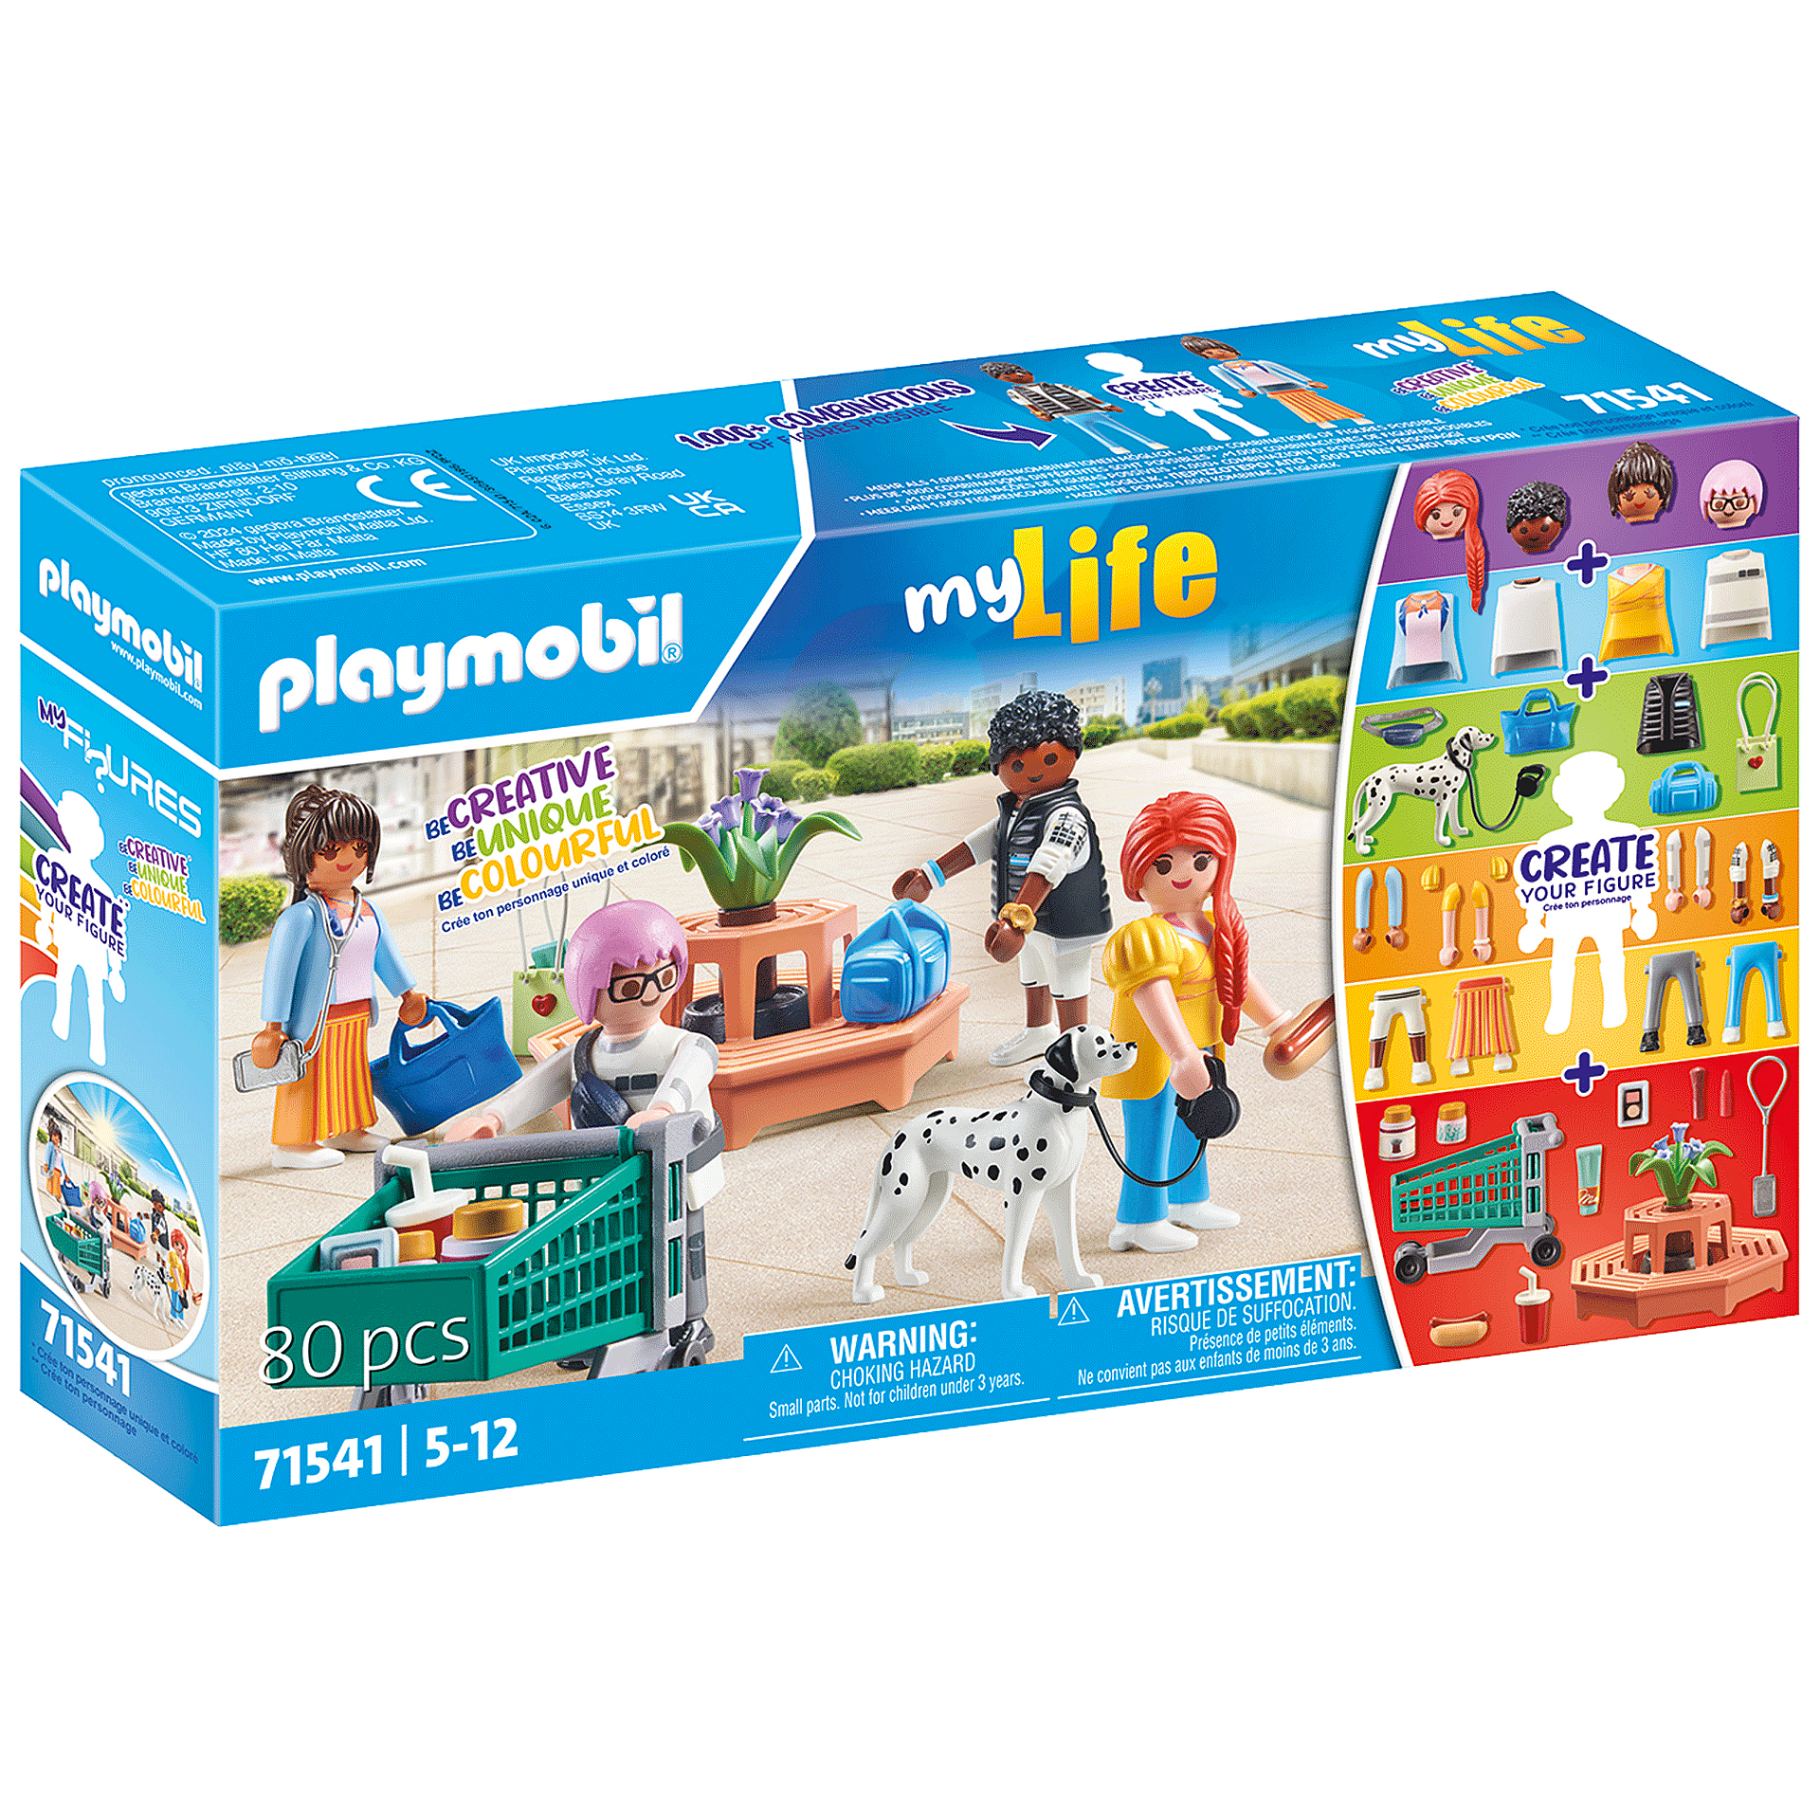 Playmobil 71541 My Life My Figures: Shopping